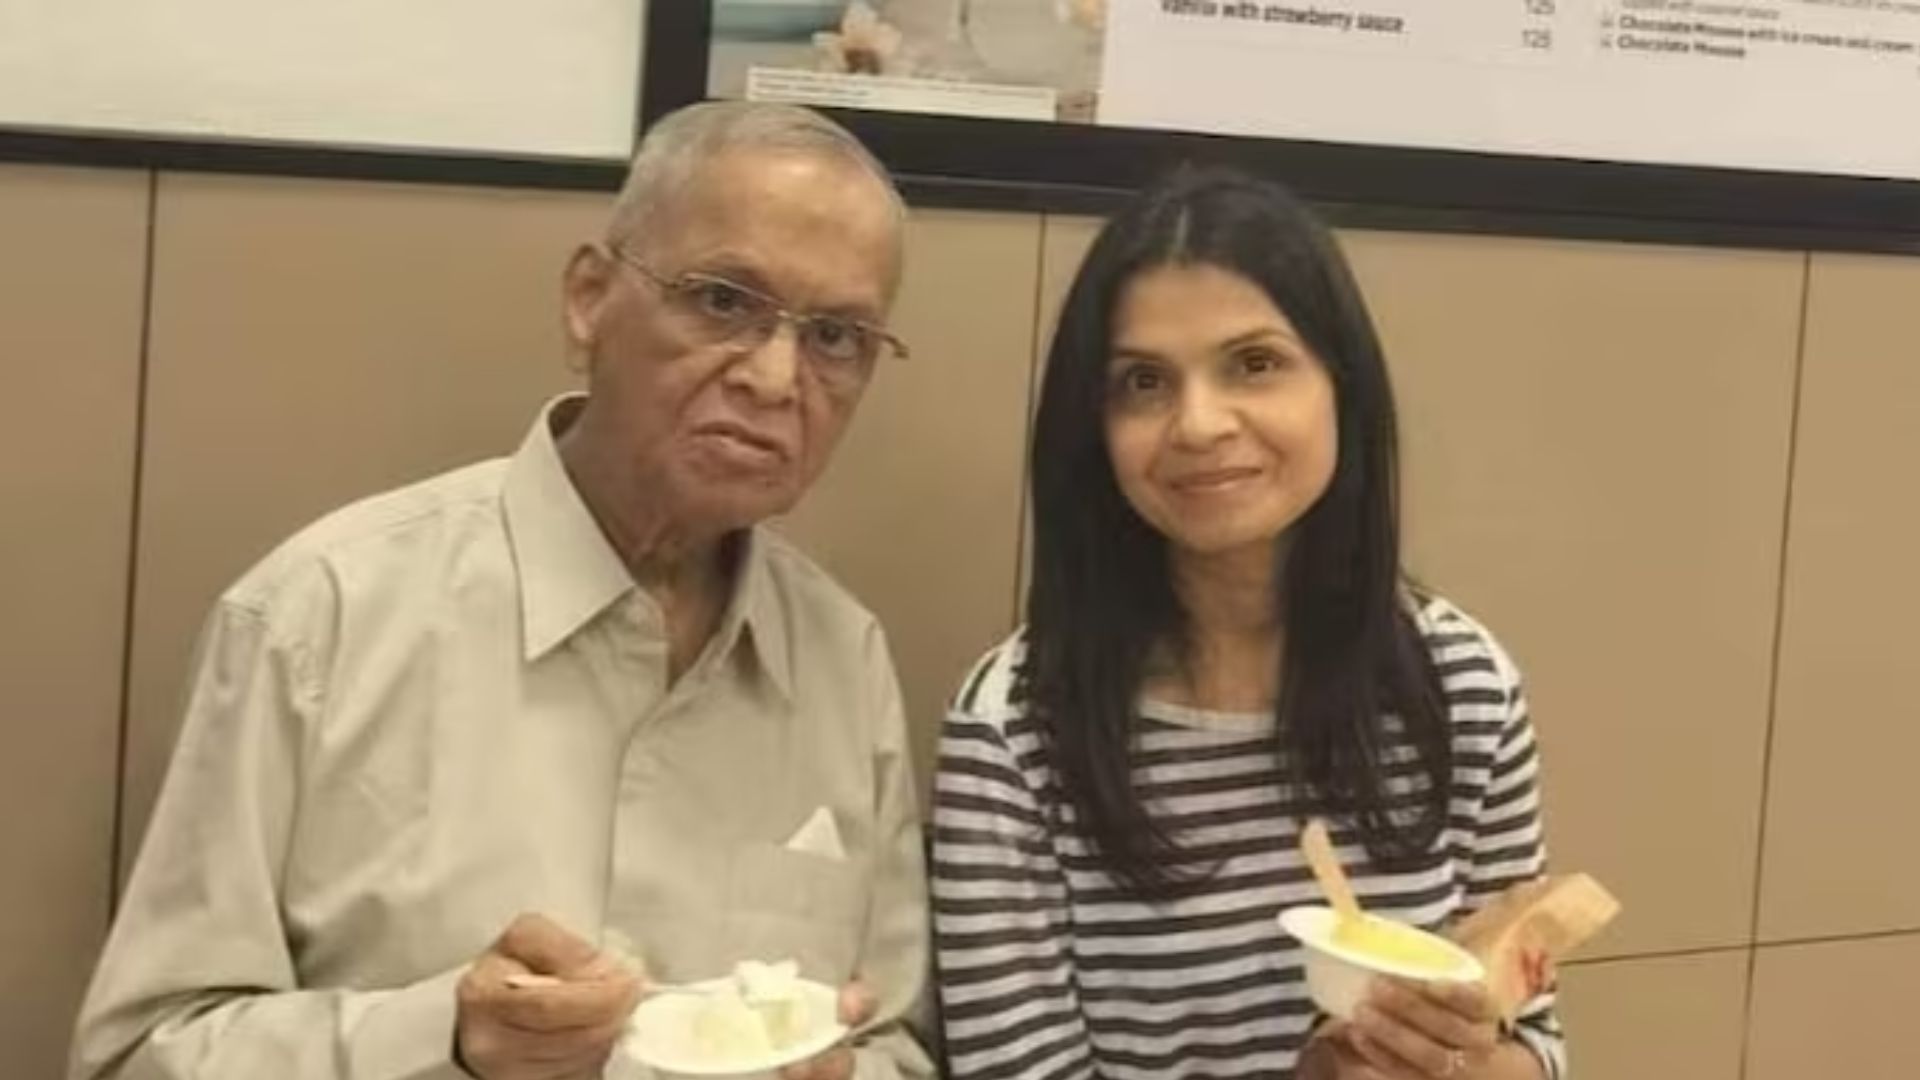 Infosys founder Narayana Murthy and his daughter, Britain’s first Lady Akshata Murty, enjoys a casual outing together in Bengaluru